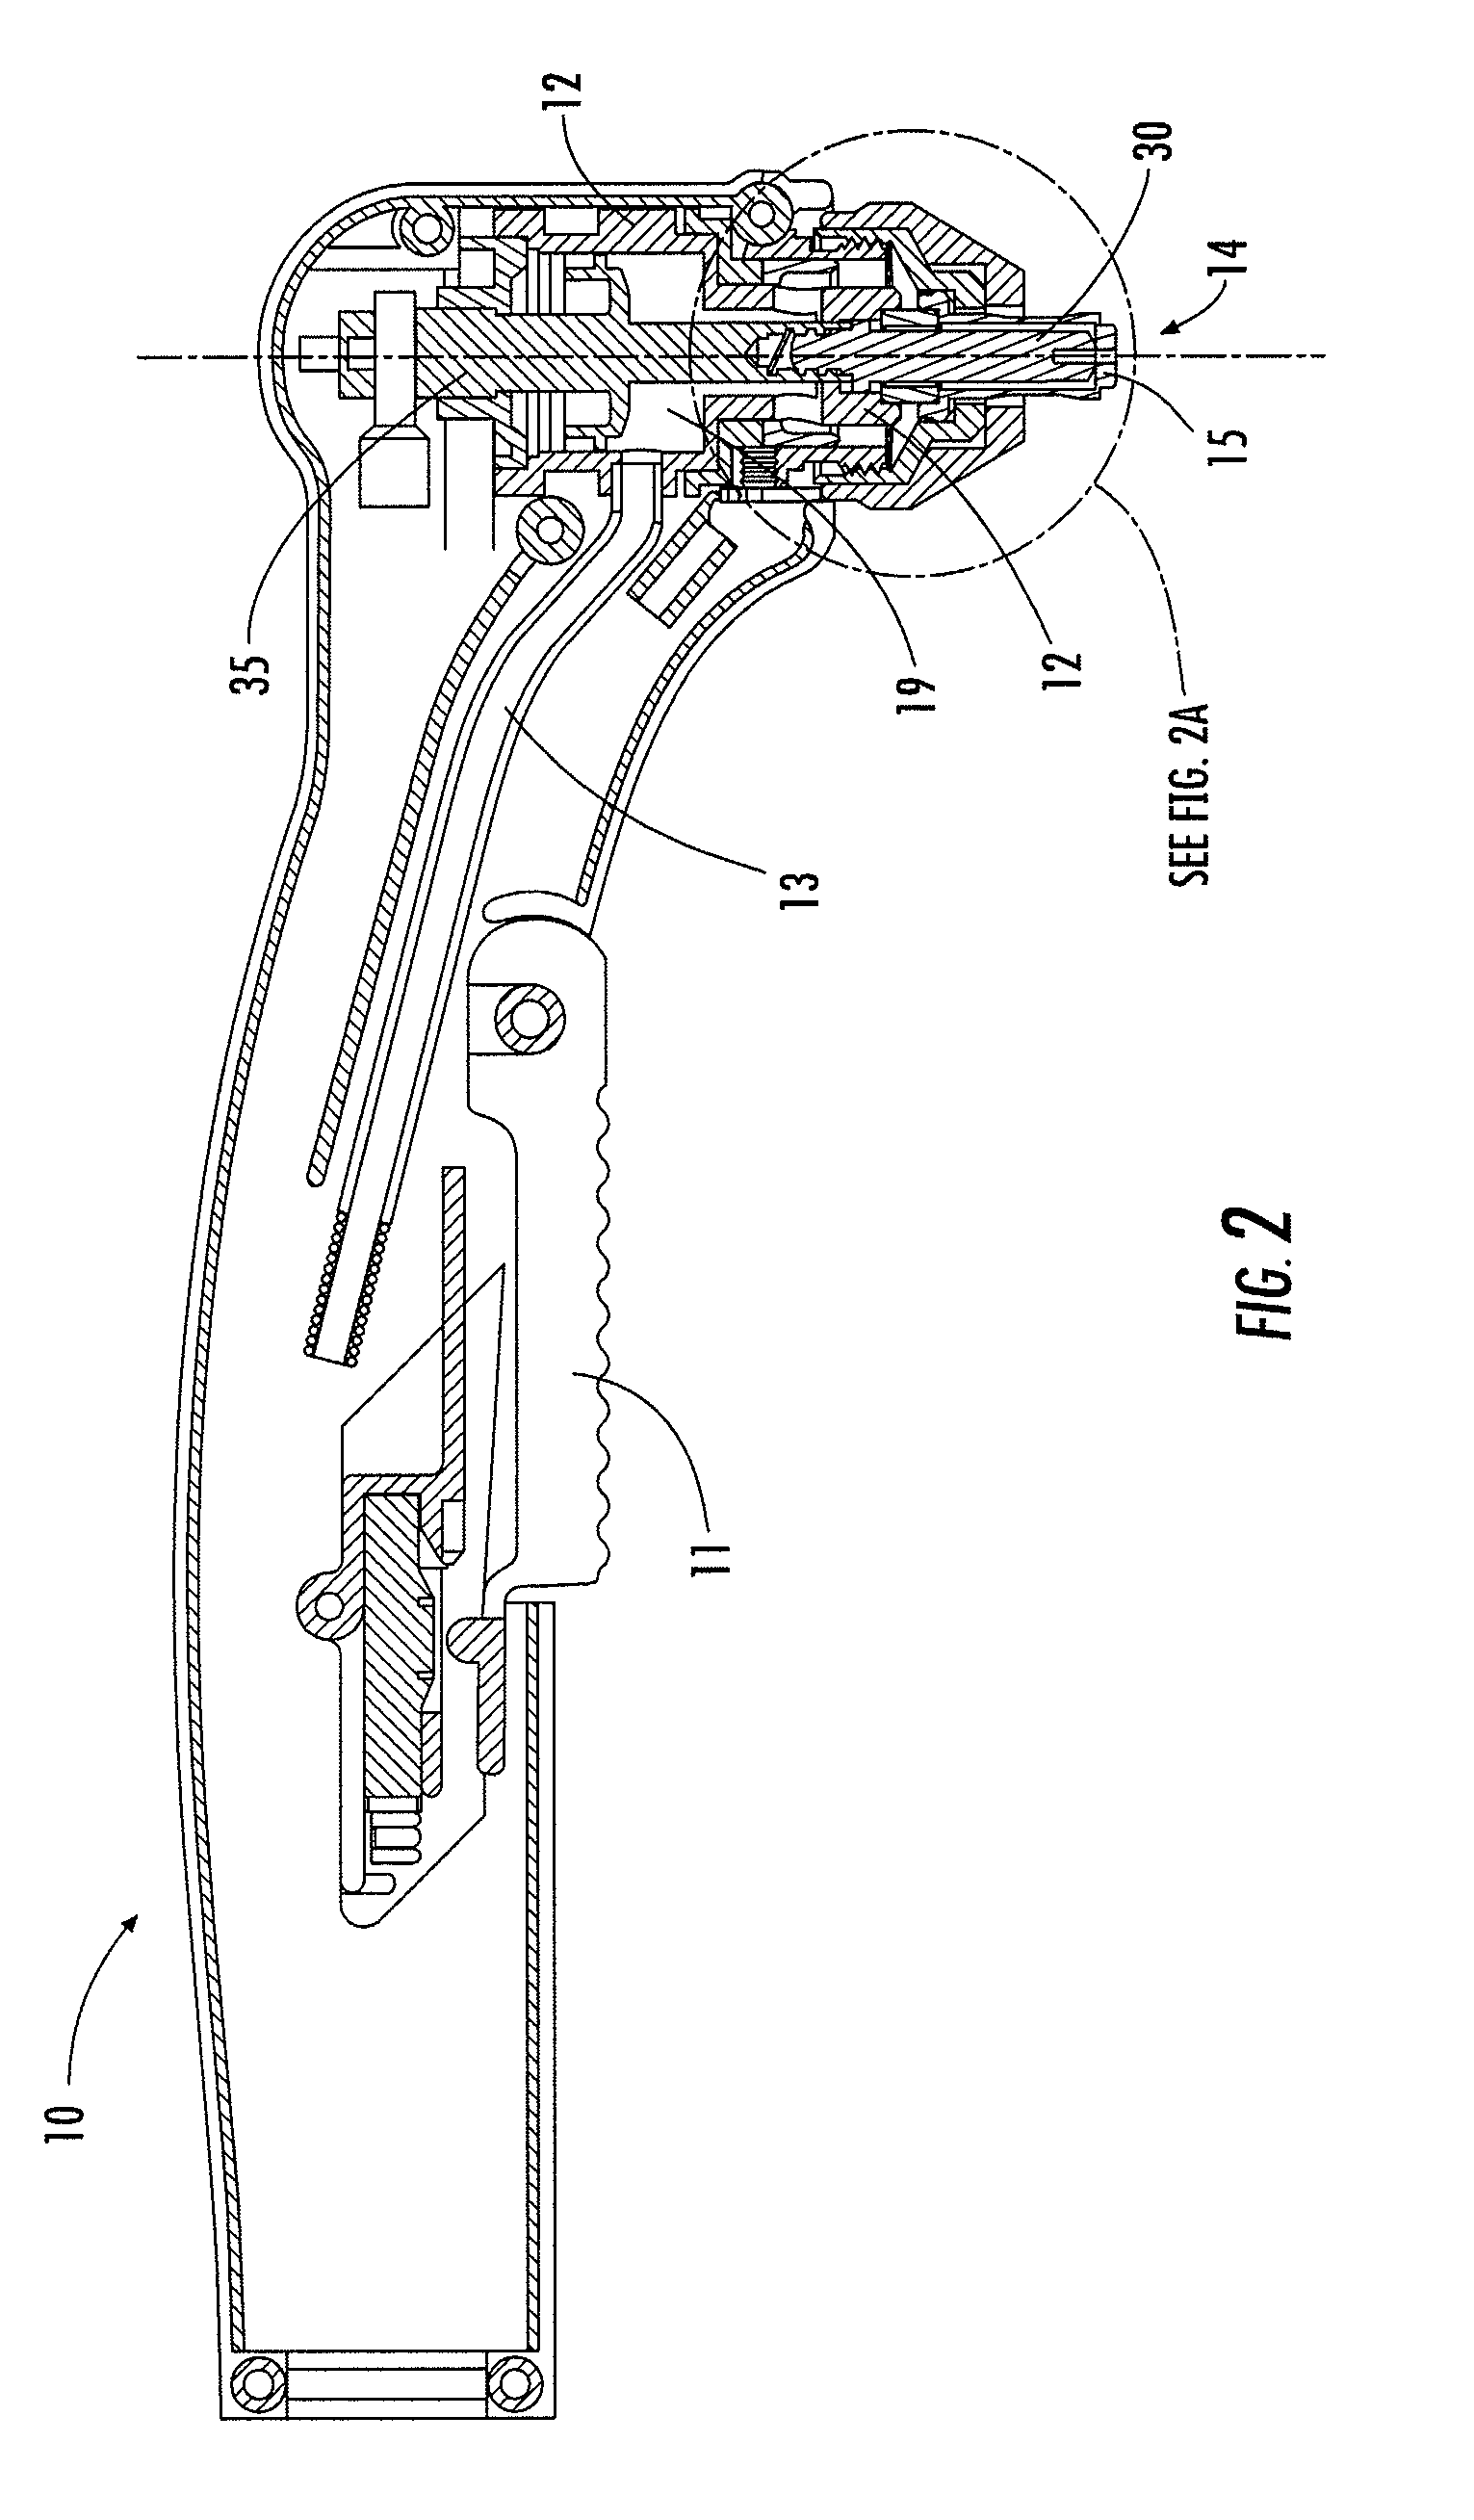 Plasma torch with electrode wear detection system